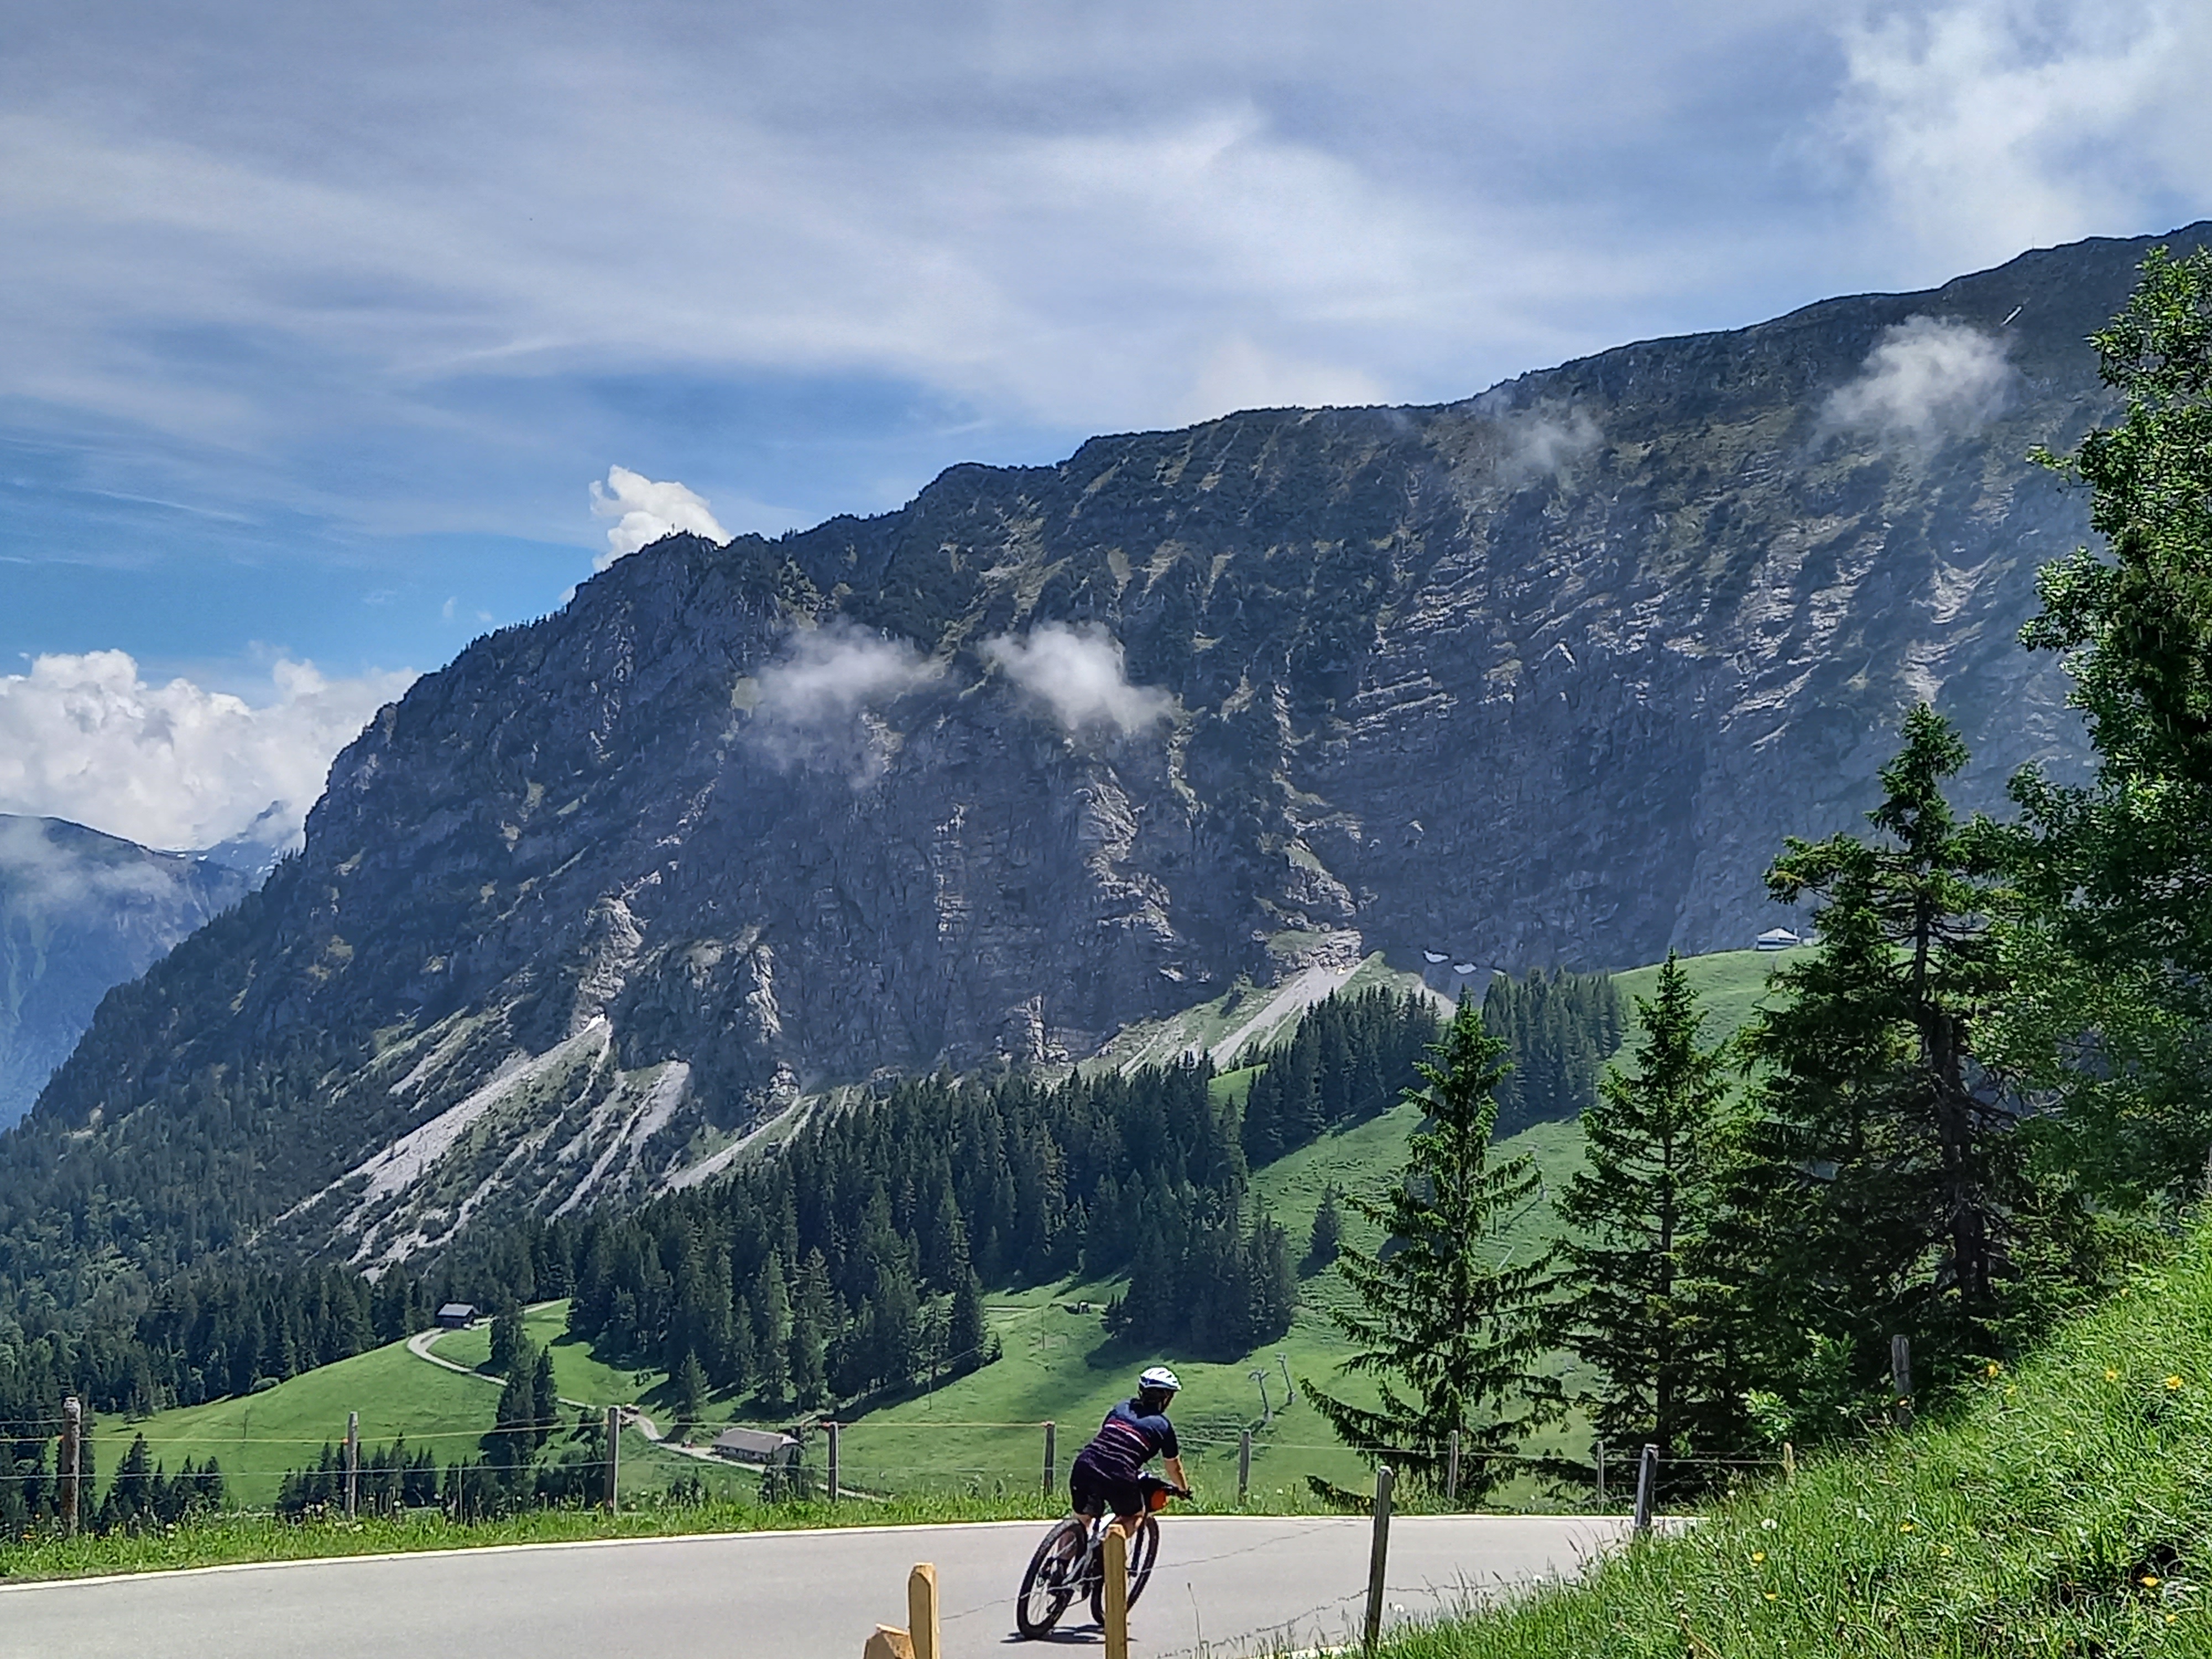 cycling companion wanted for climbing mountain passes in France